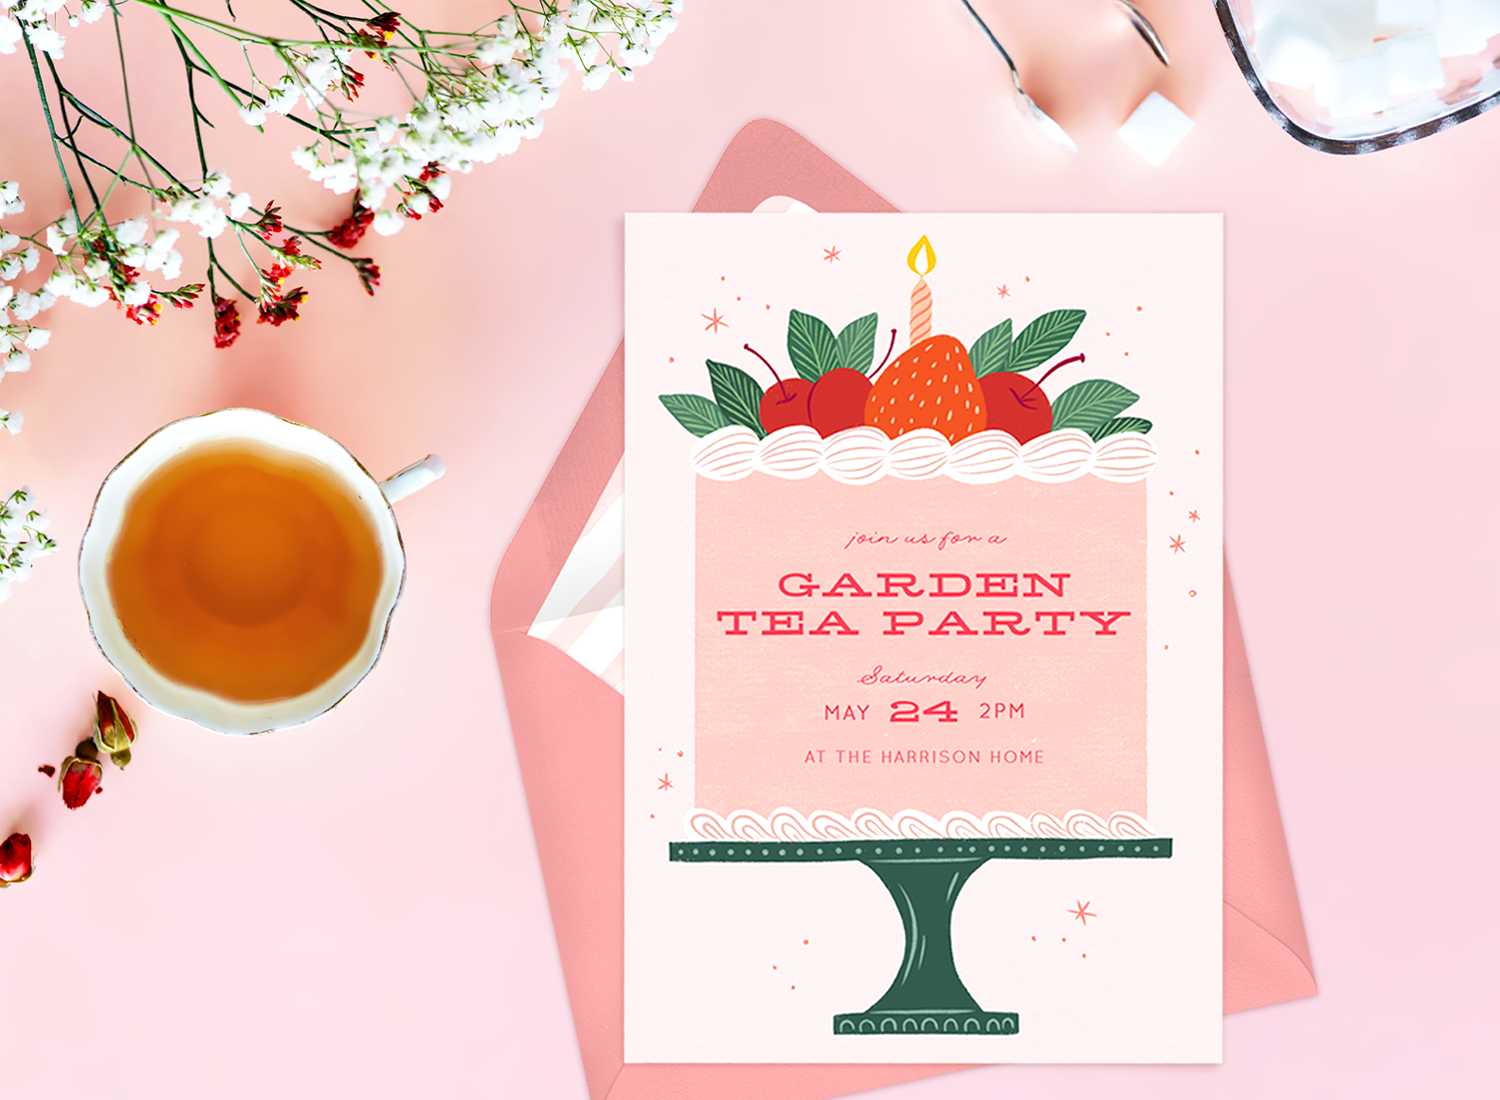 Tea party invitations: a cup of tea, flowers, and an invitation